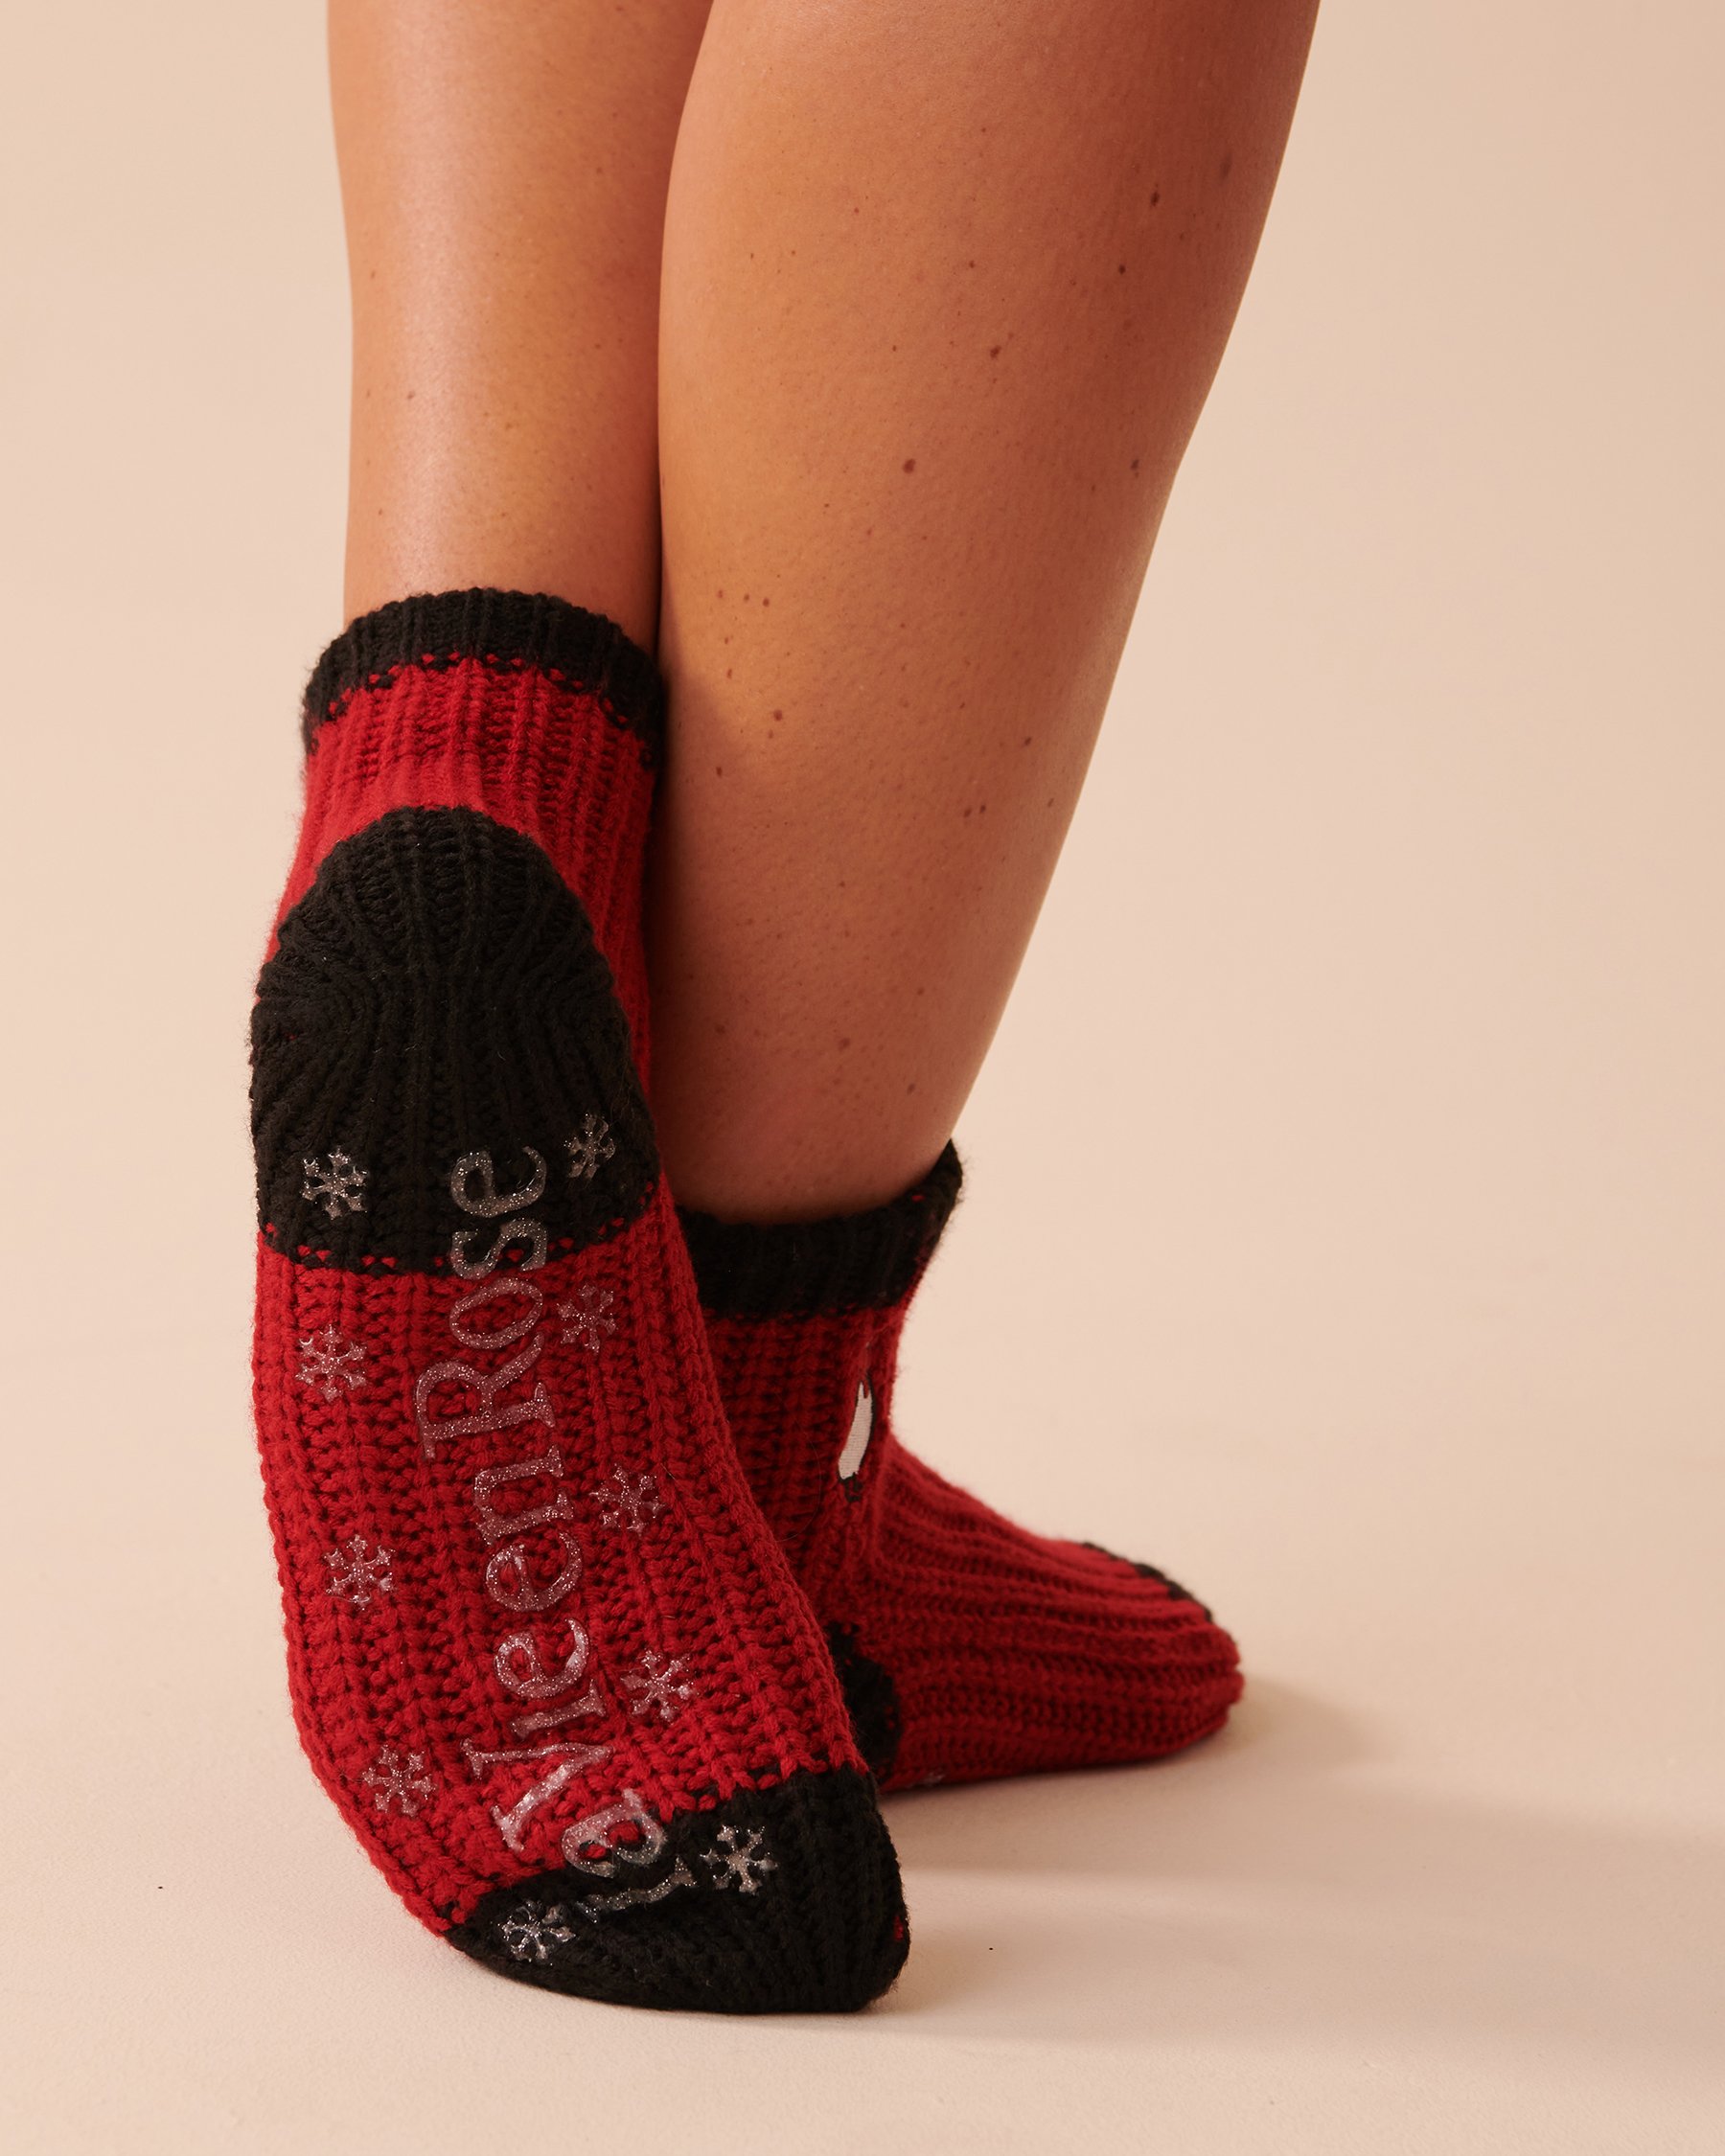 LA VIE EN ROSE Knitted Socks with Winter Embroidery Jingle Red 40700295 - View2